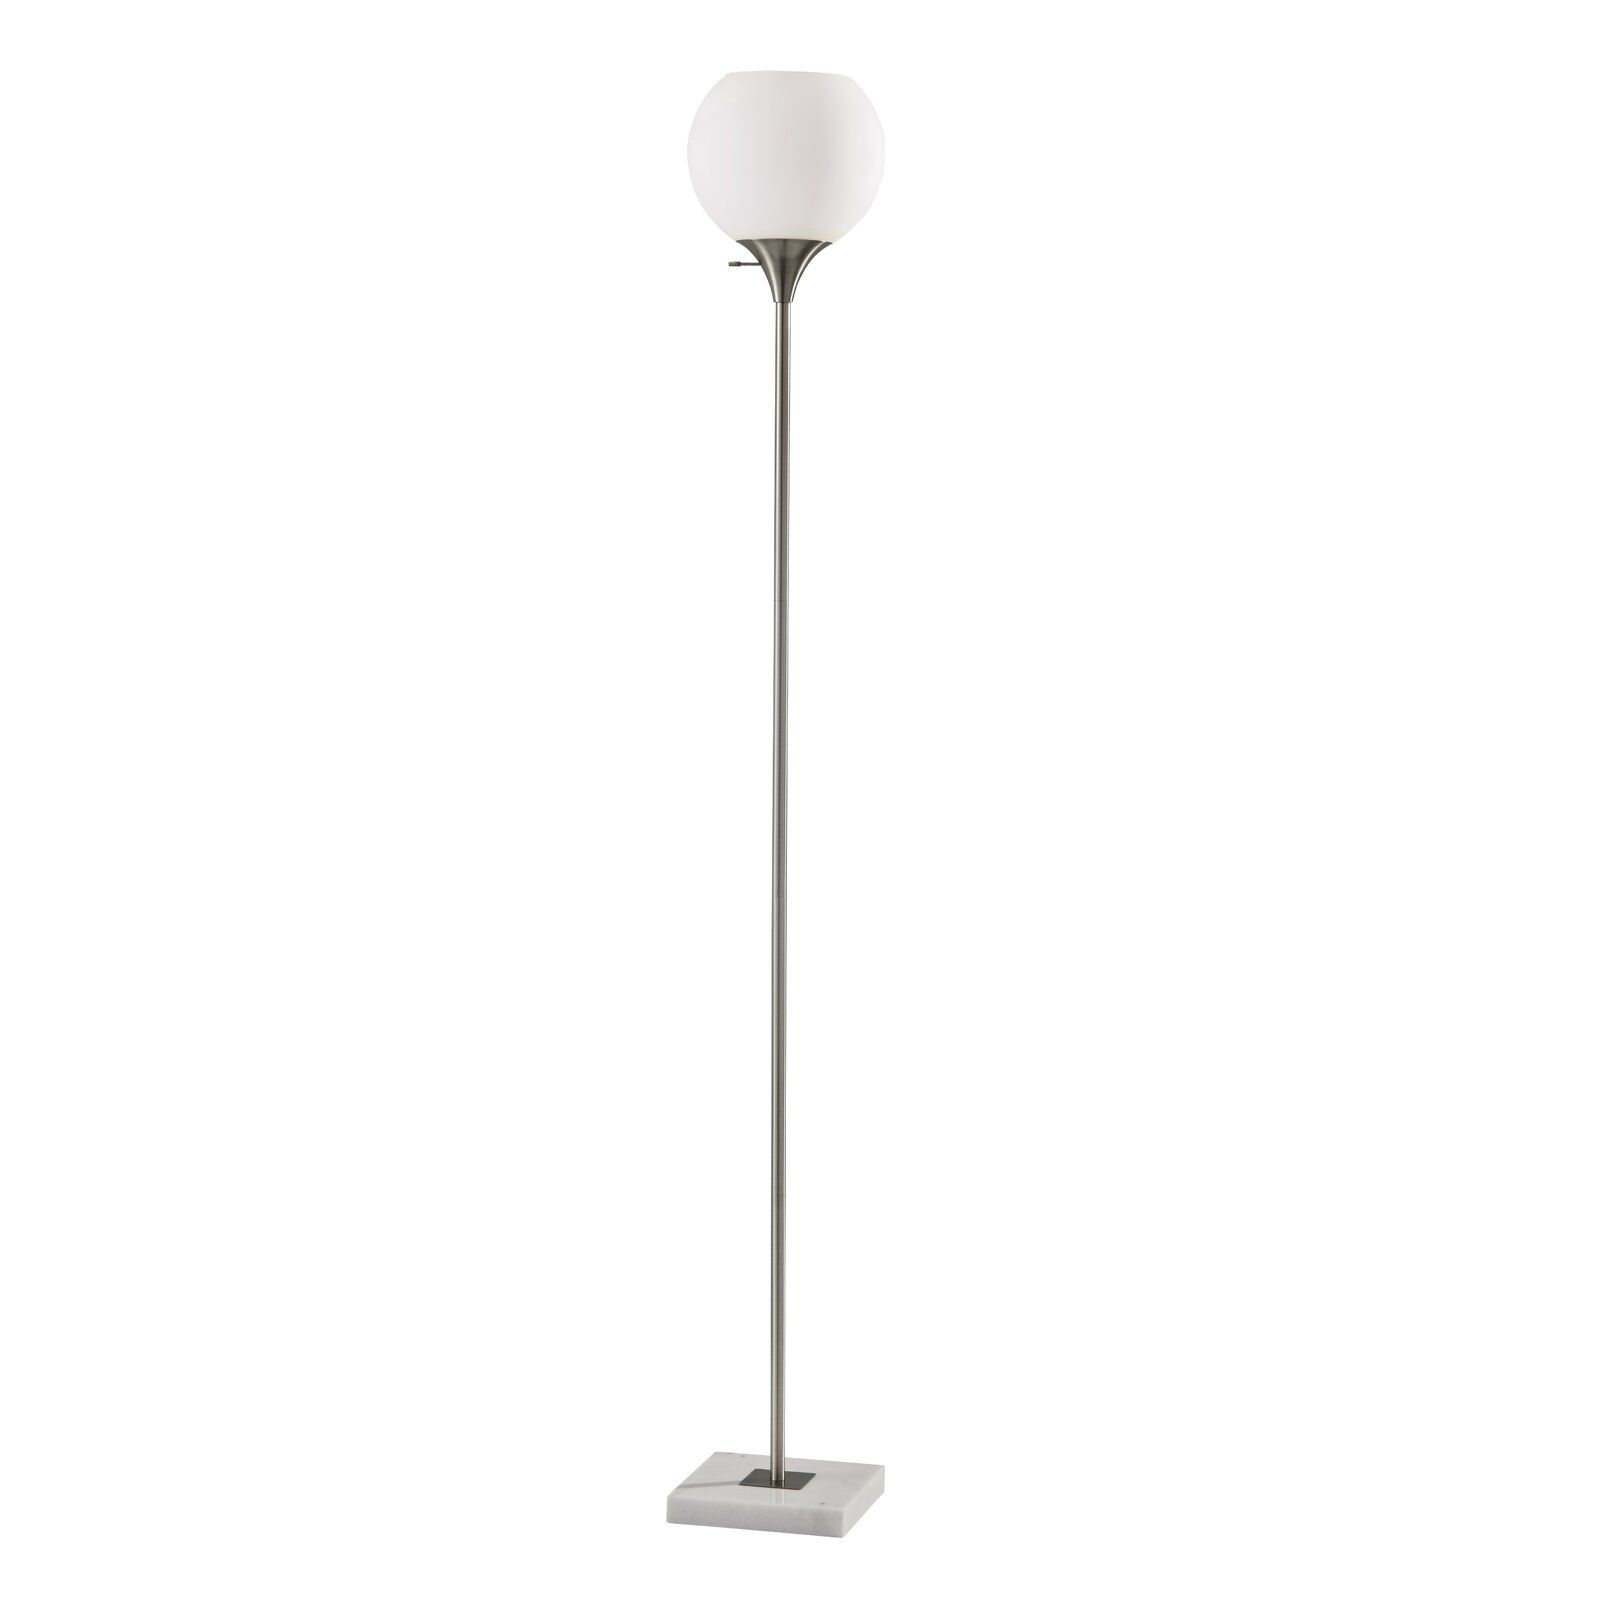 Lought 71 Torchiere Floor Lamp Lafite Lighting In 2019 in size 1600 X 1600